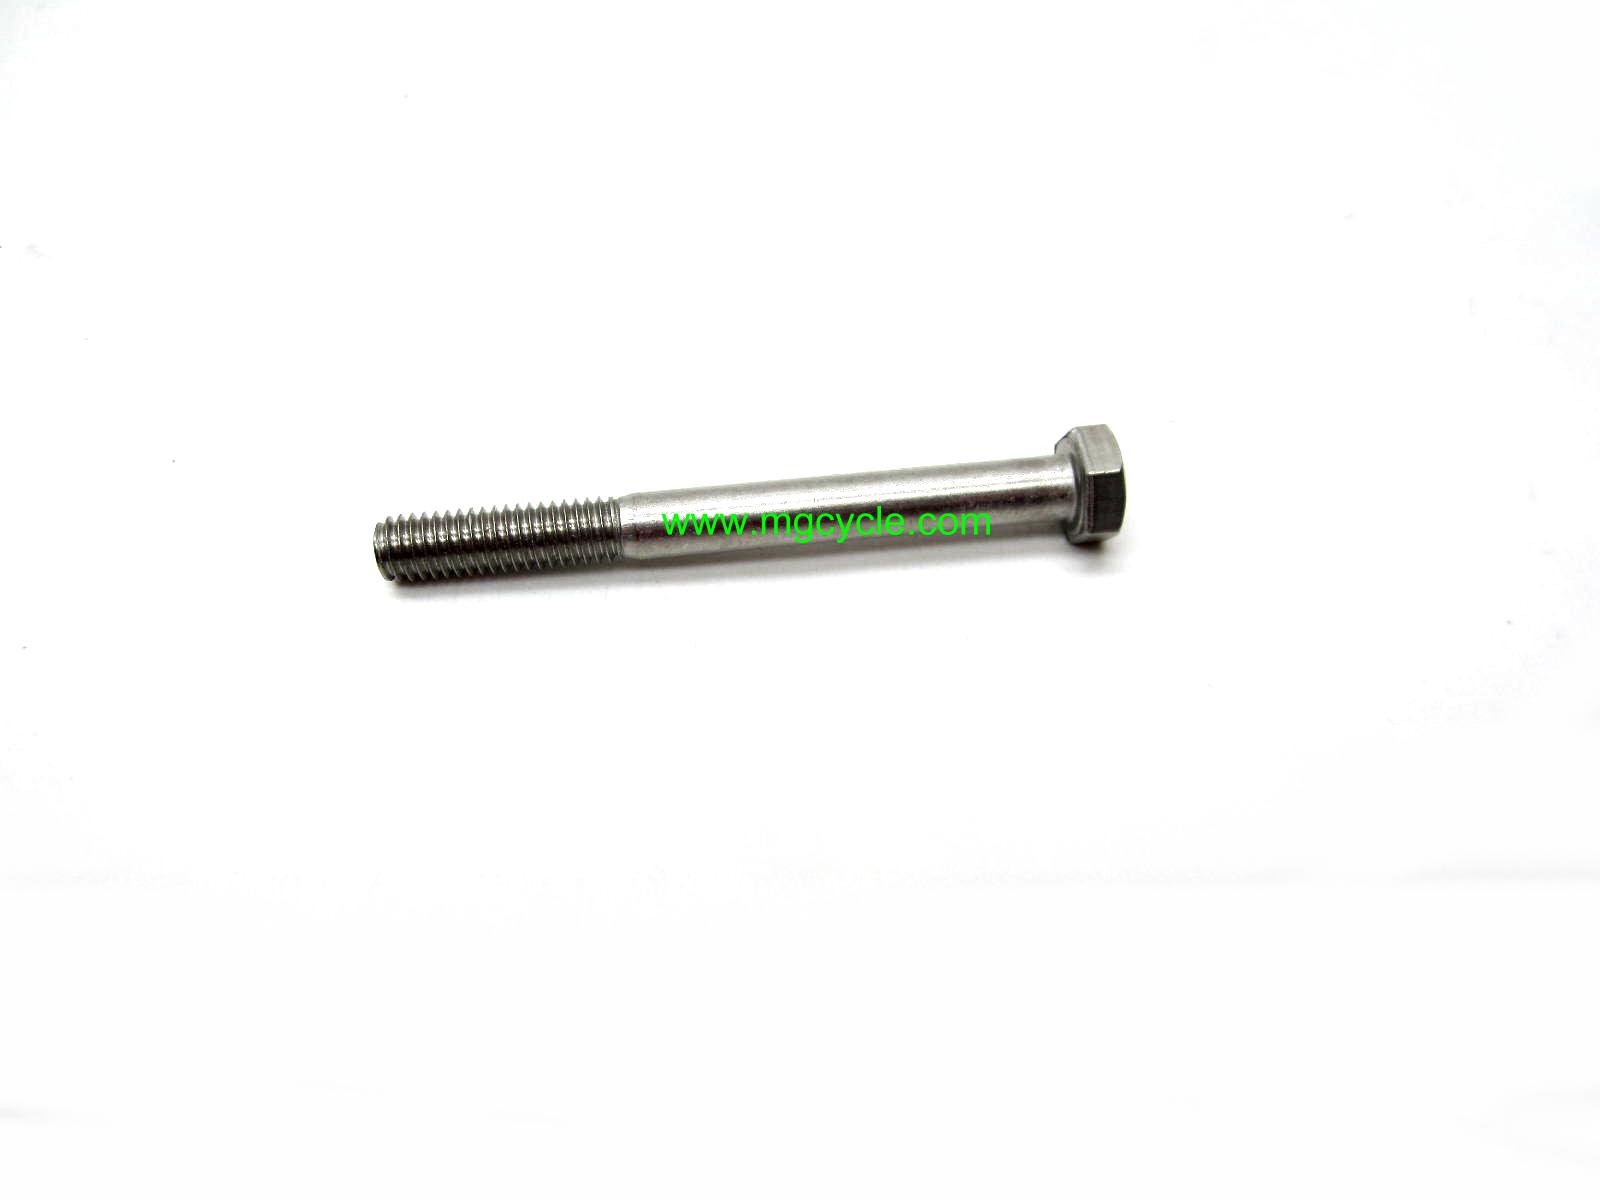 6mm x 60mm hex head bolt, stainless